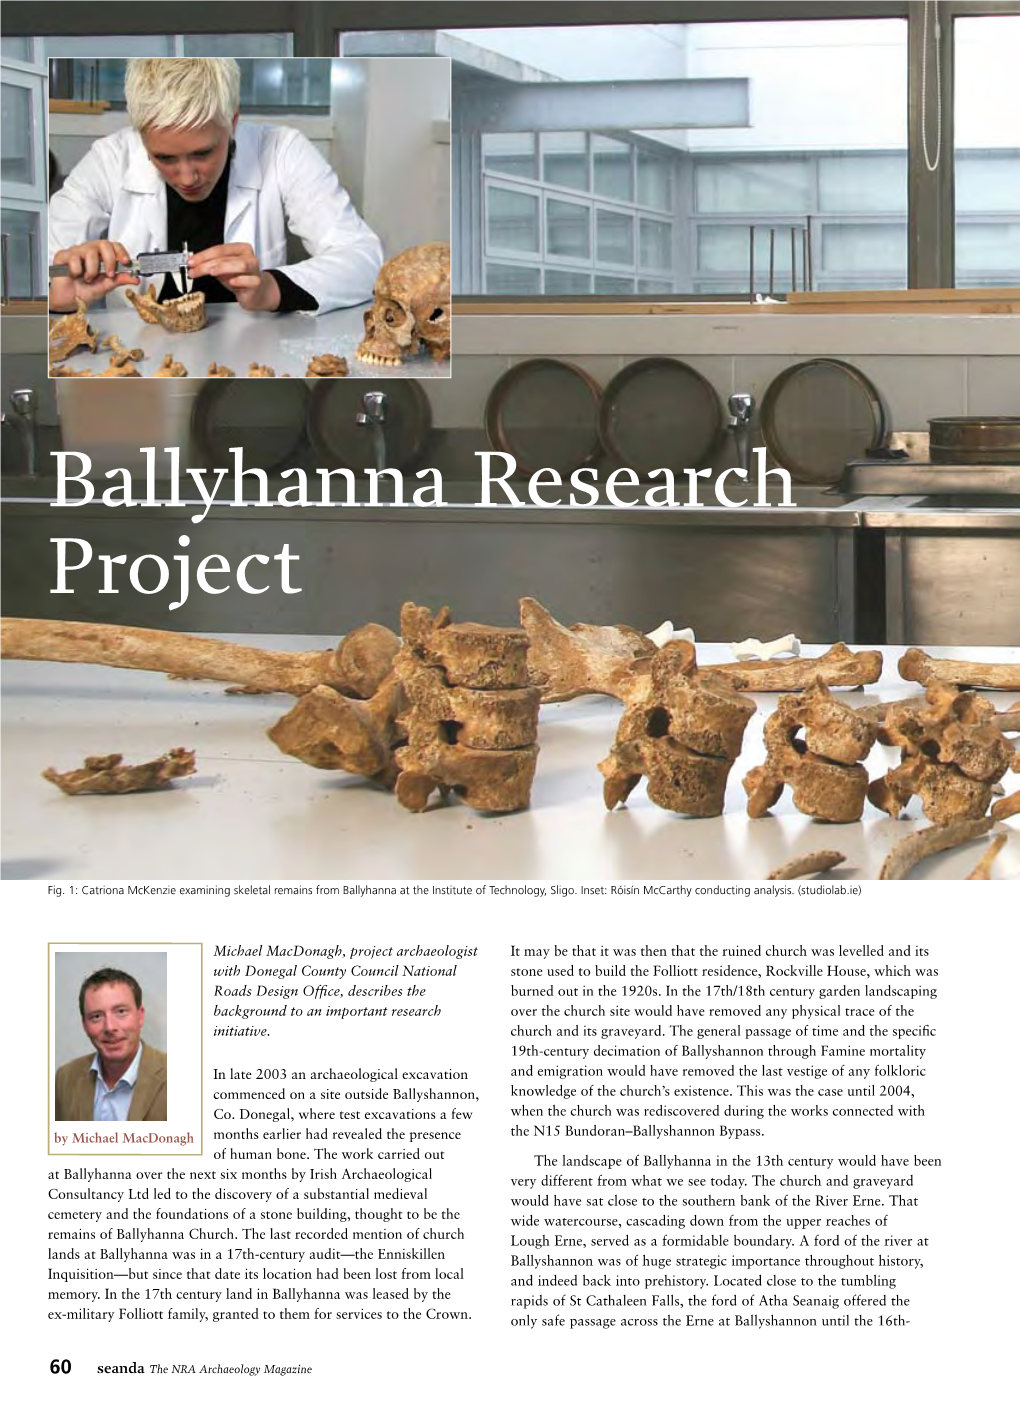 Ballyhanna Research Project